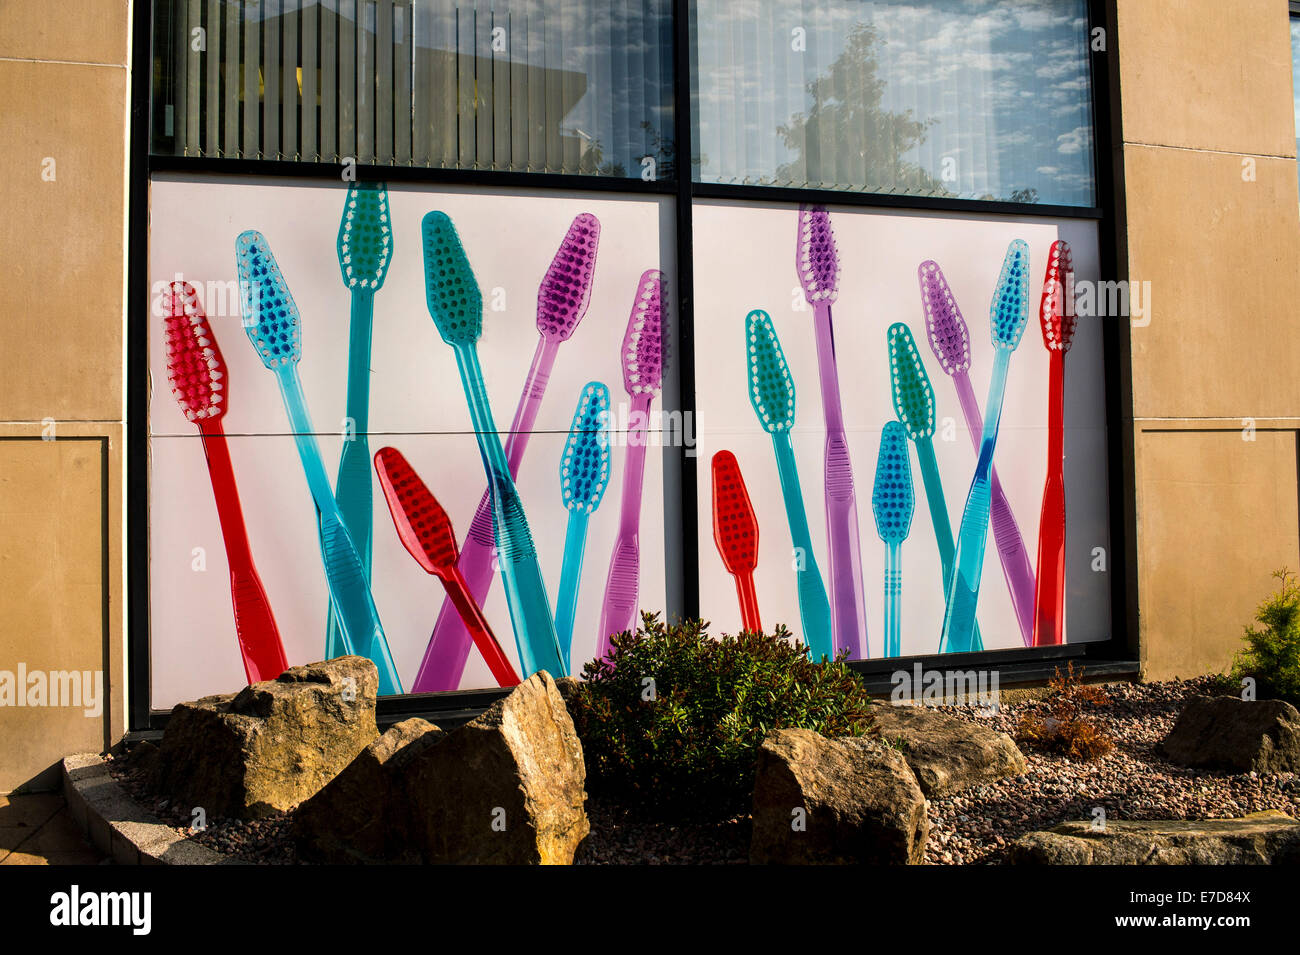 Large illustration of coloured tooth brushes on exterior of dentistry pracrice, Derry, Londonderry, Northern Ireland. Stock Photo